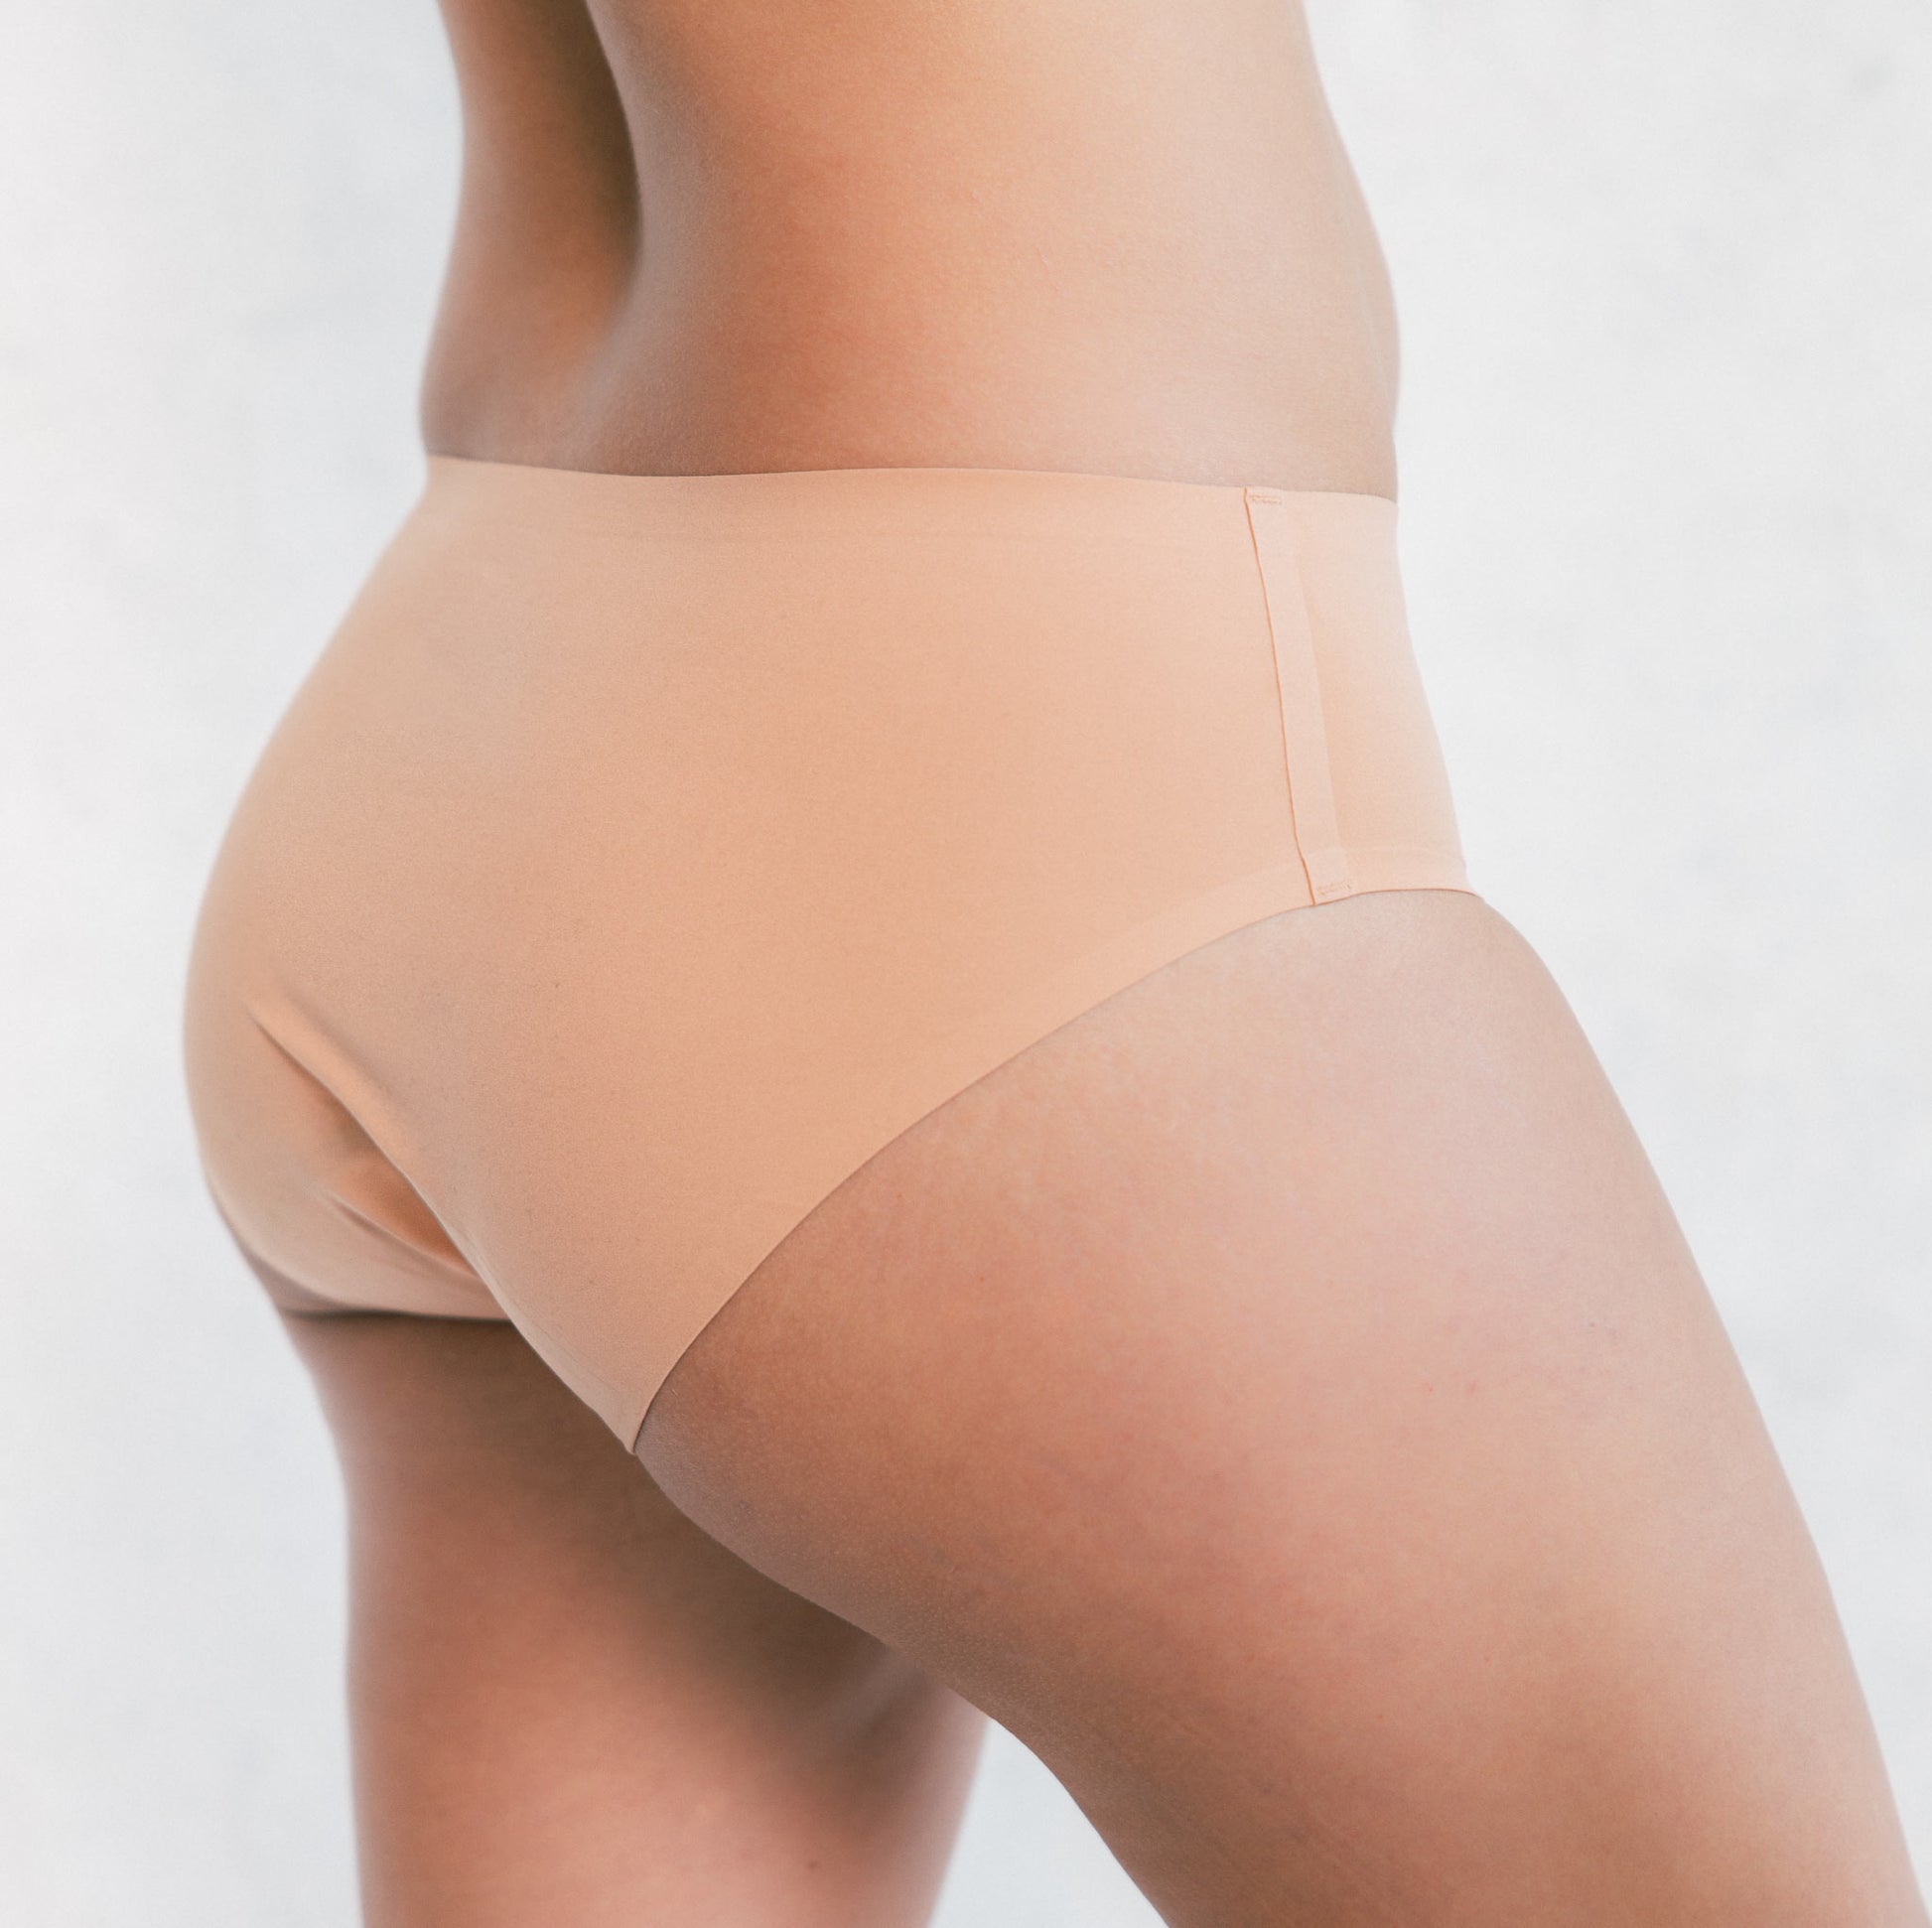 Great Savings On Stretchy And Stylish Wholesale Seamless Underwear